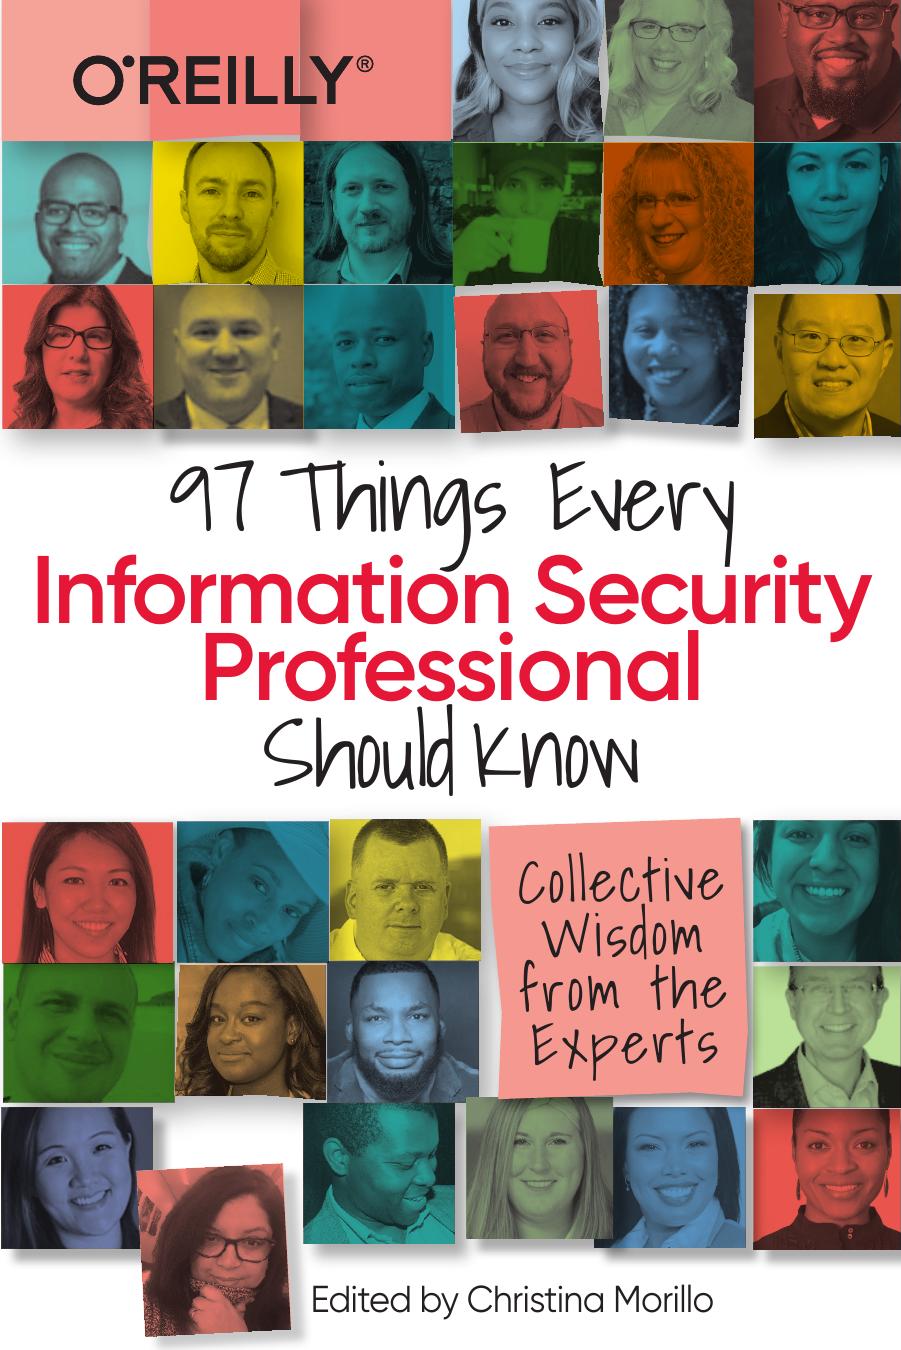 97 Things Every Information Security Professional Should Know by Christina Morillo